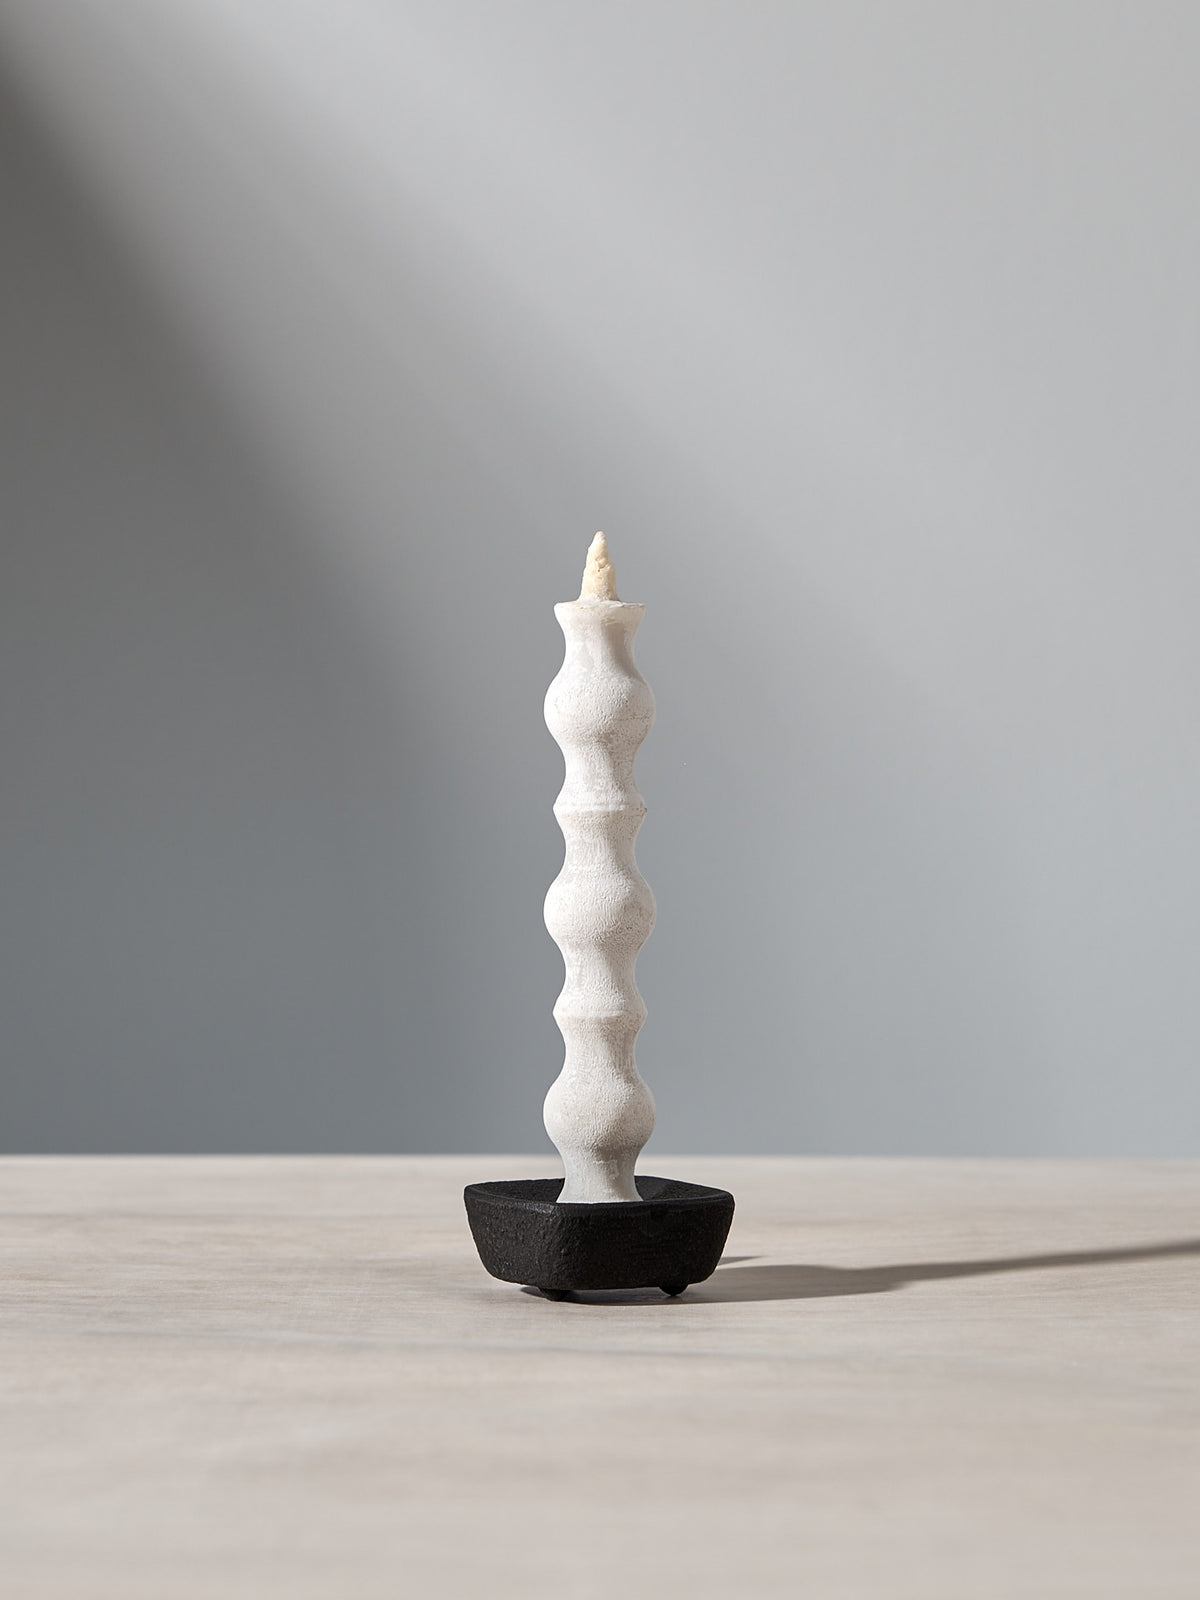 A NANAO – 5 Piece Mixed Box Set candle by Takazawa is sitting on a table with a light behind it.